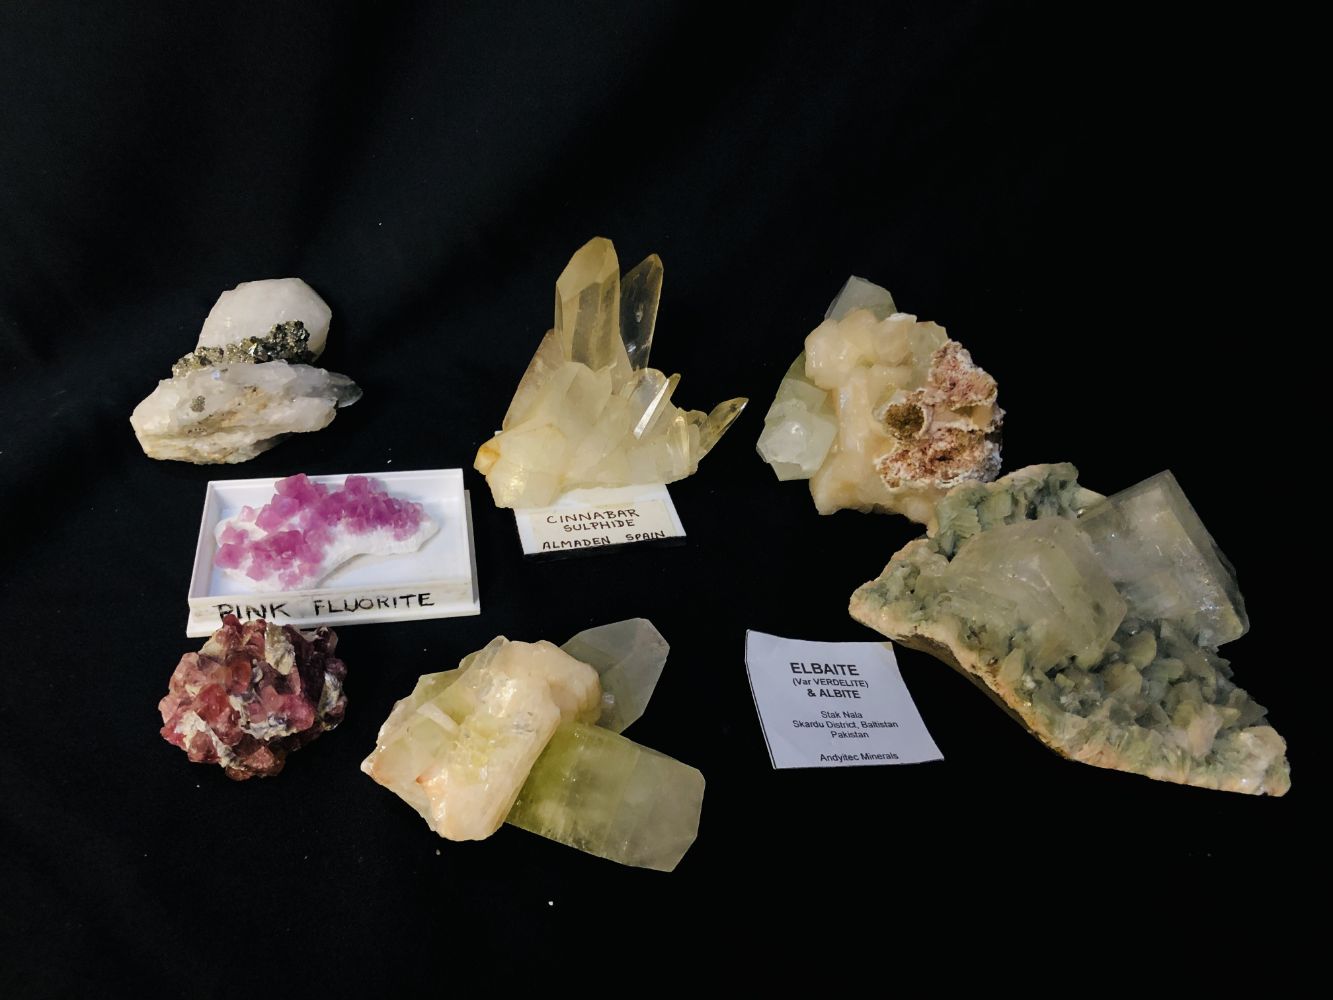 Crystals & Minerals, Silver, Jewellery, Antiques & collectibles, Modern Furnishings, Electronics, Household Effects and more